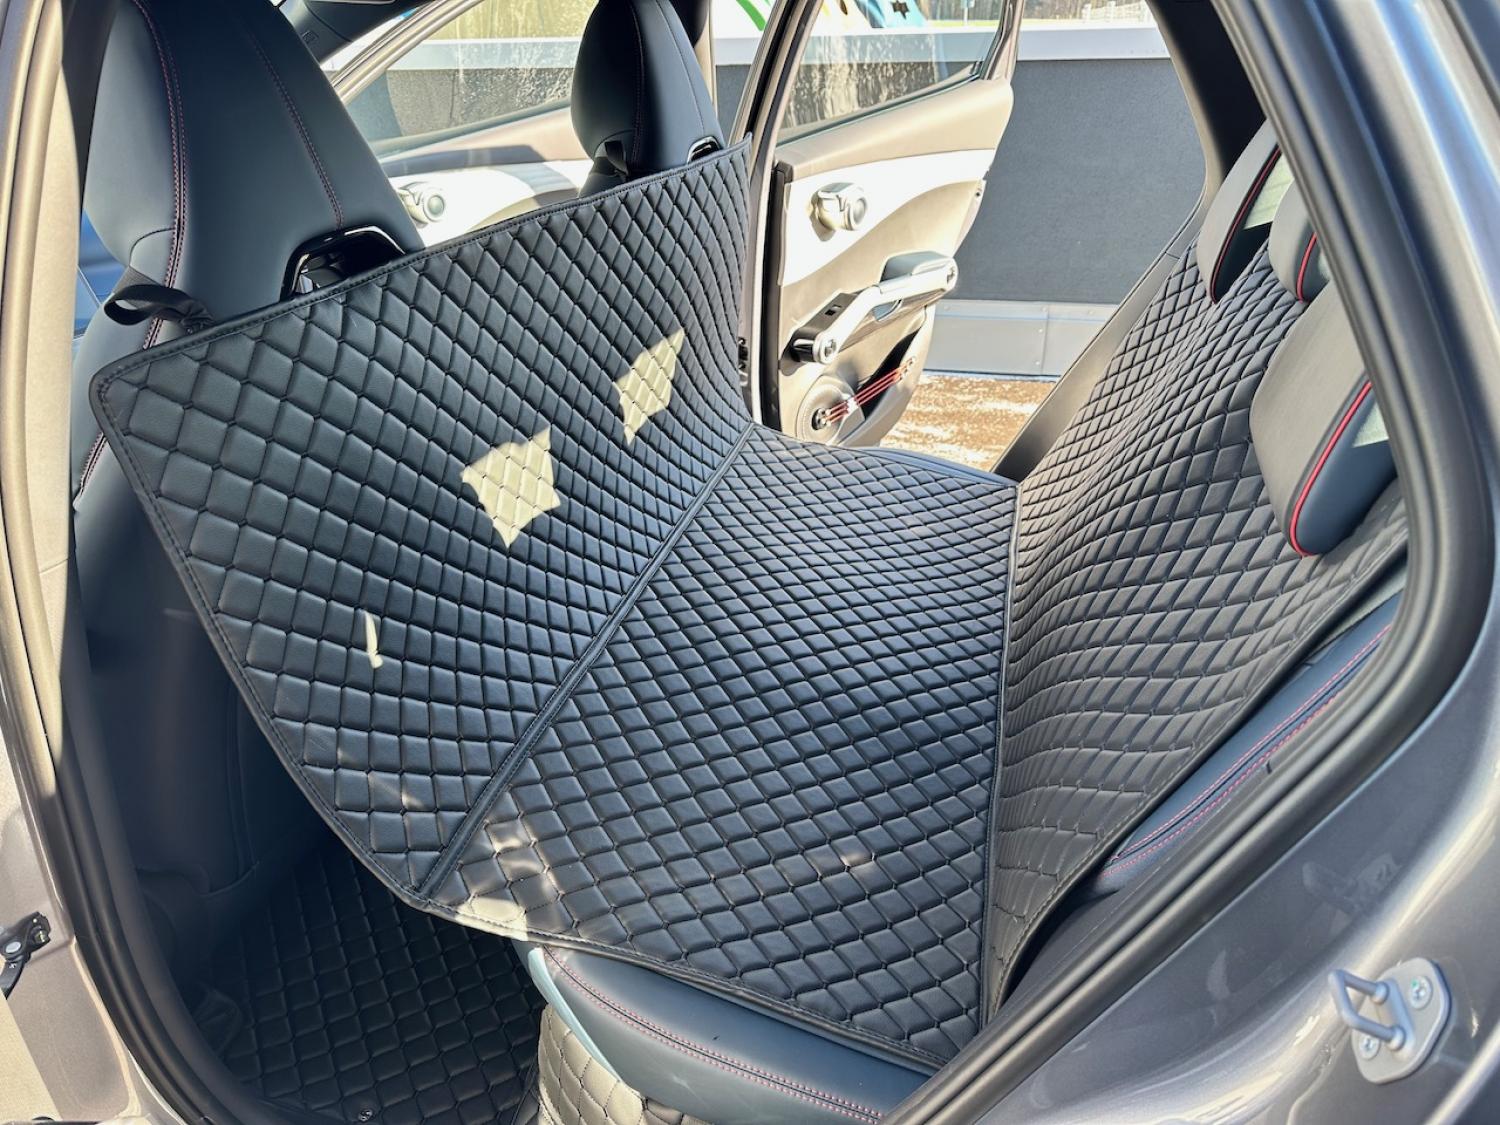 CARSTYLER® Back Seat Cover Geeignet Für VW Tiguan AD1, 2016-2022